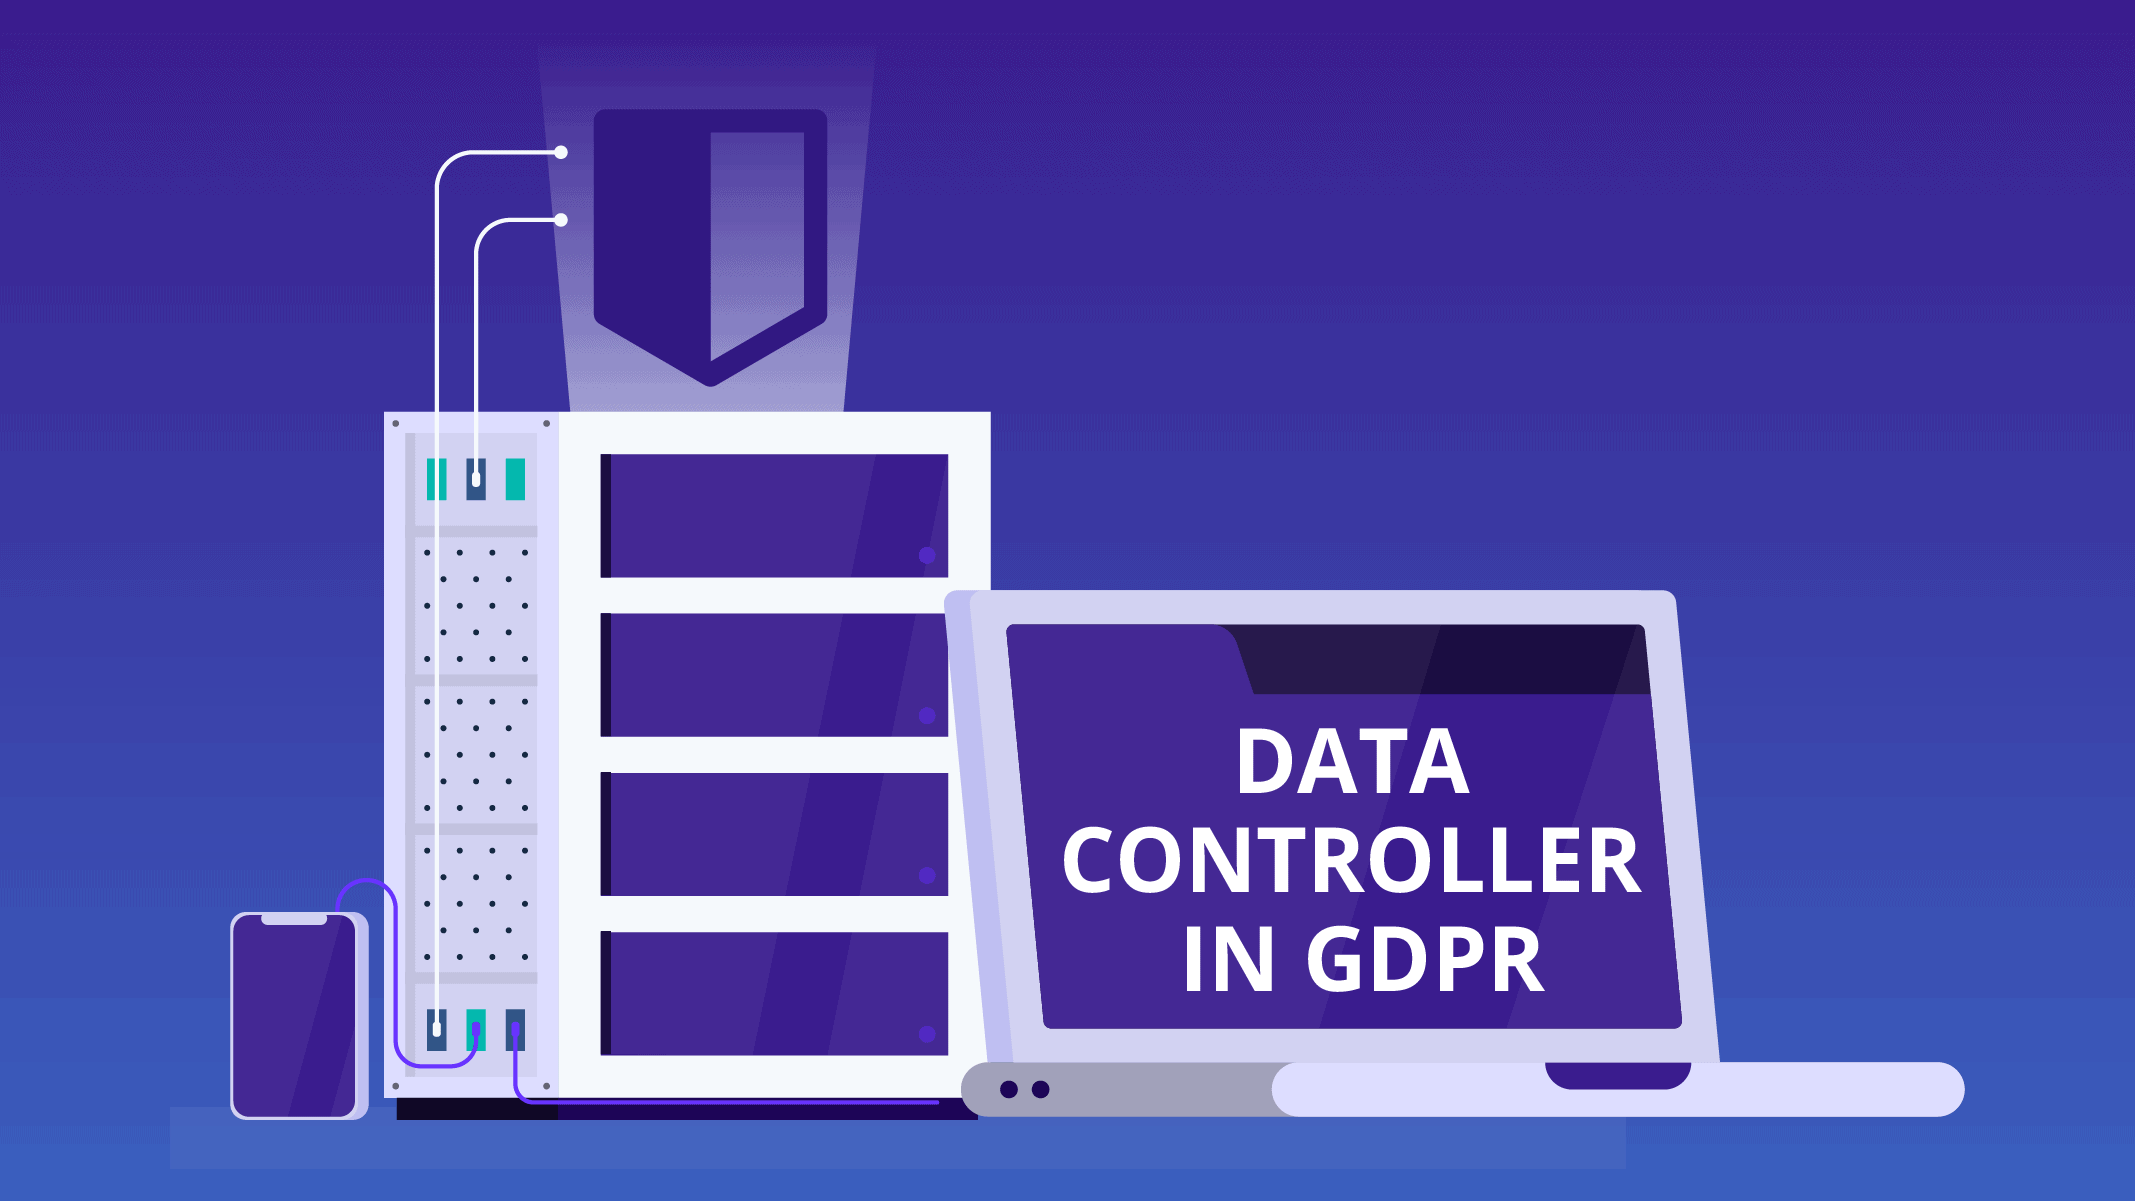 What is a Data Controller in GDPR?